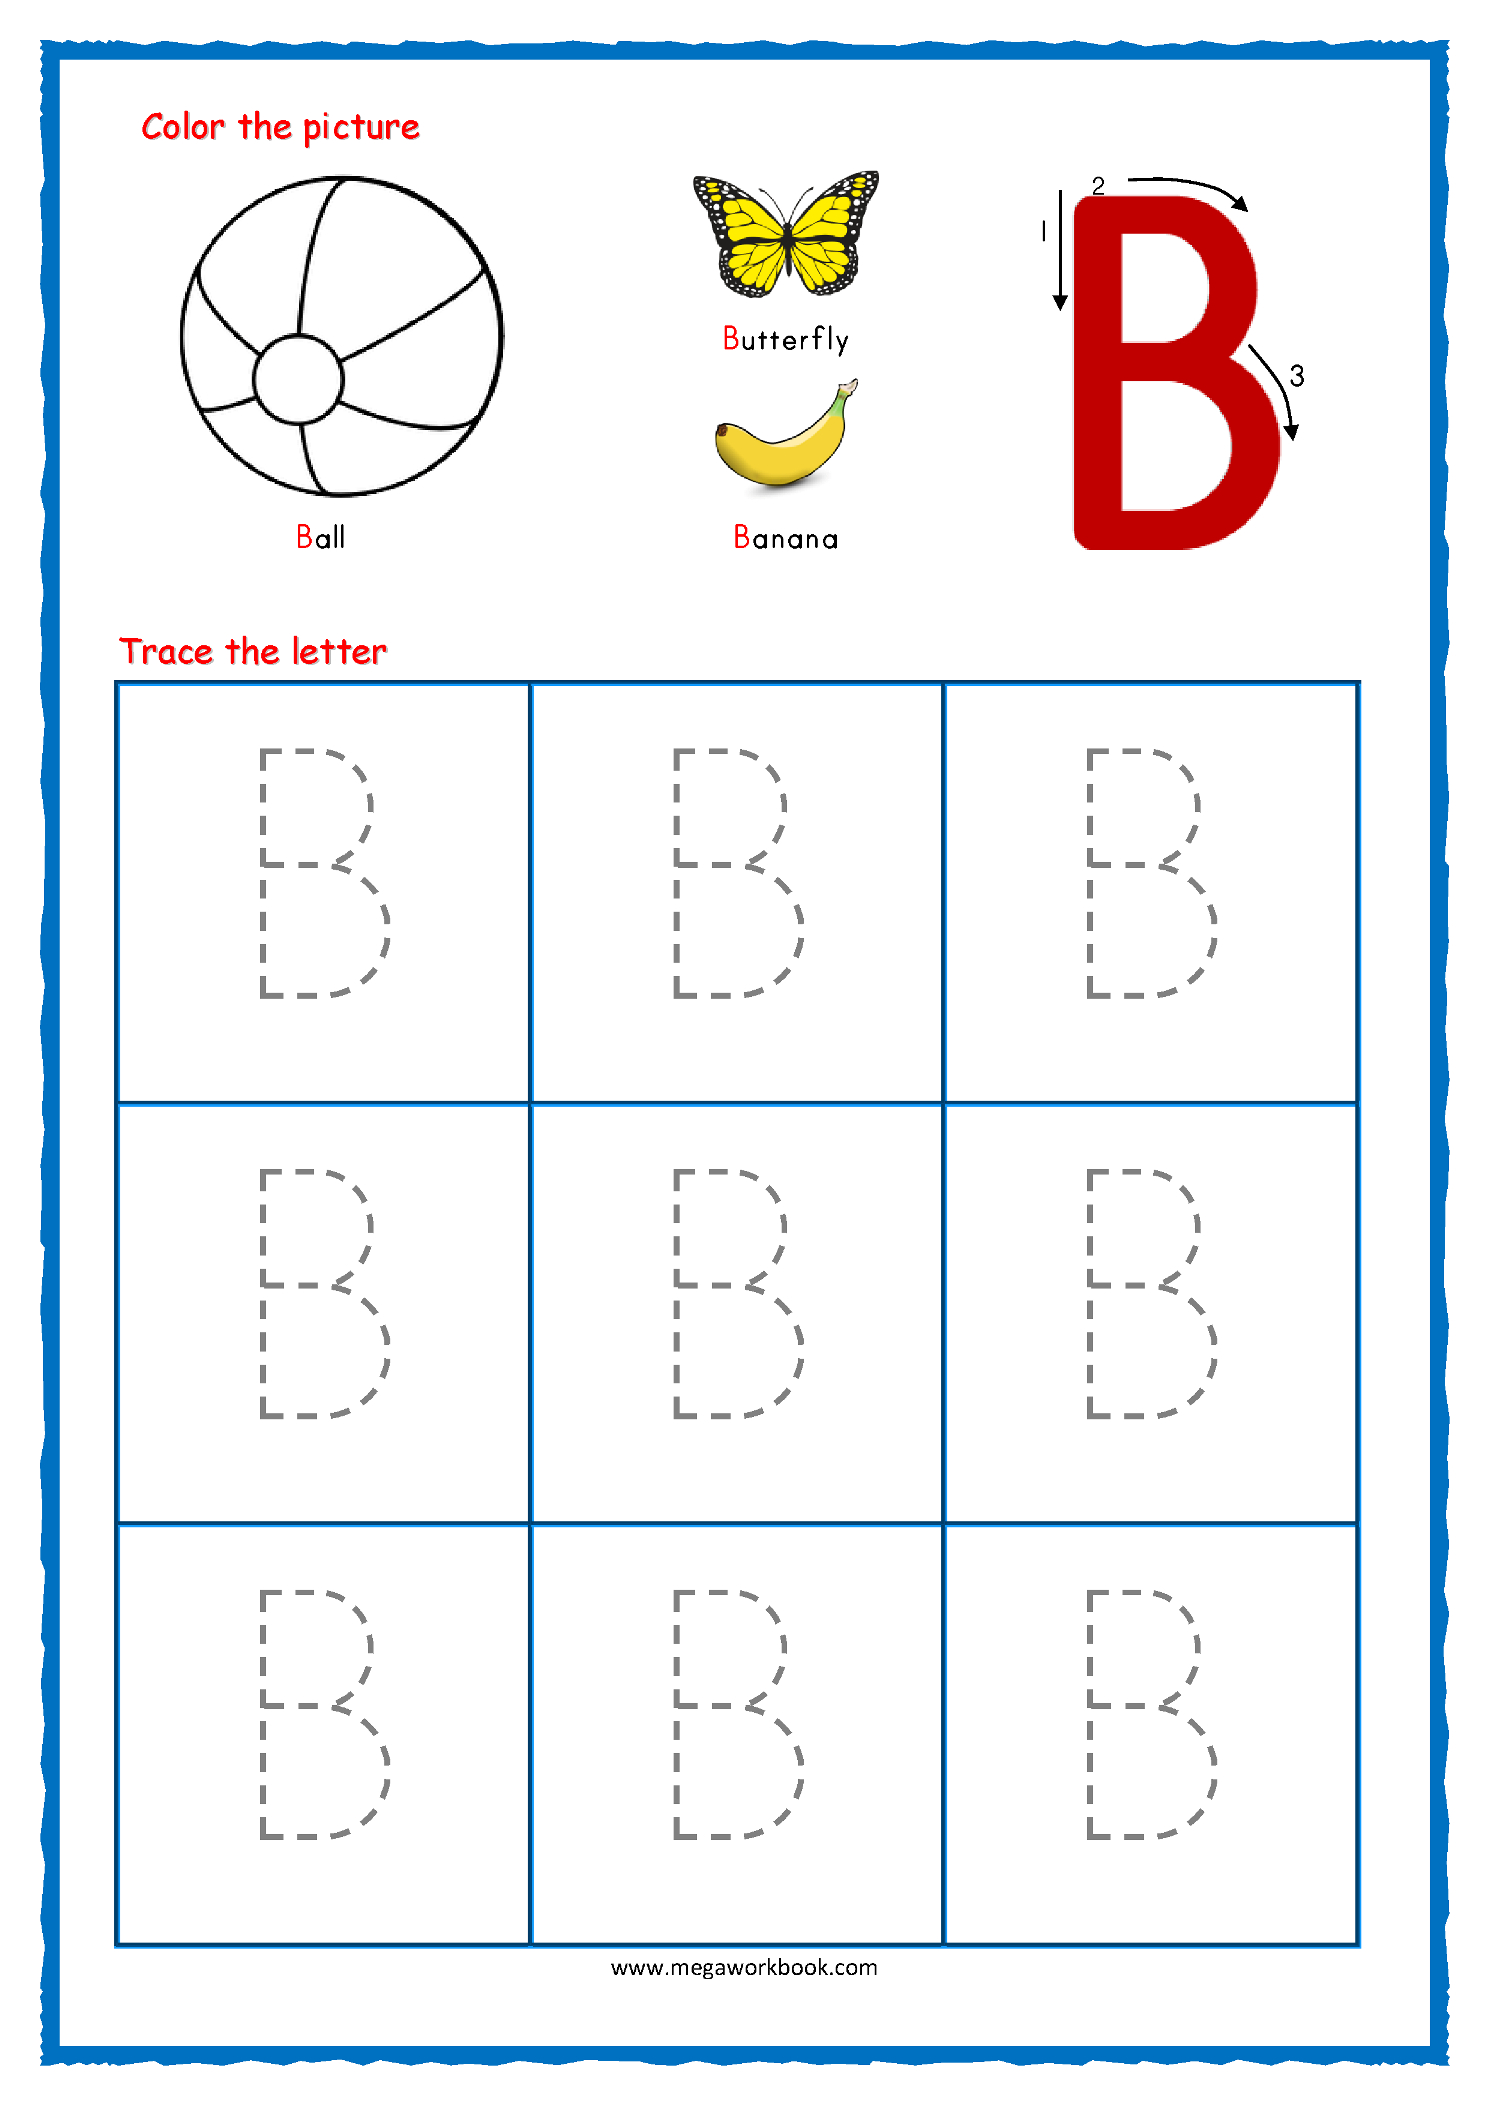 Coloring Book : Free Preschool Printables Coloring Book inside Tracing Letters And Numbers Books